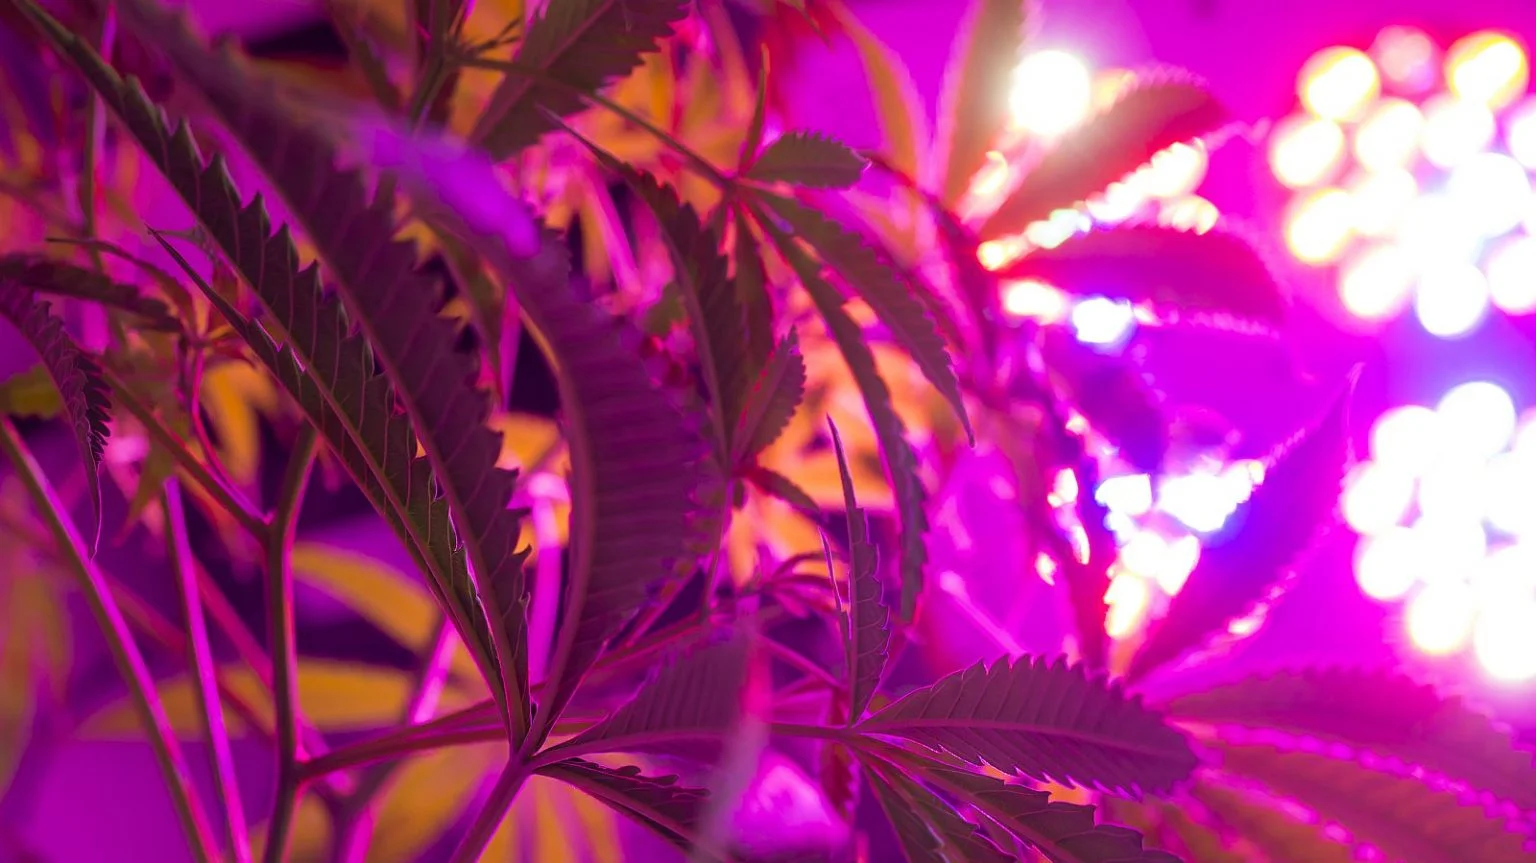 Can You Use A Heat Lamp To Grow Cannabis